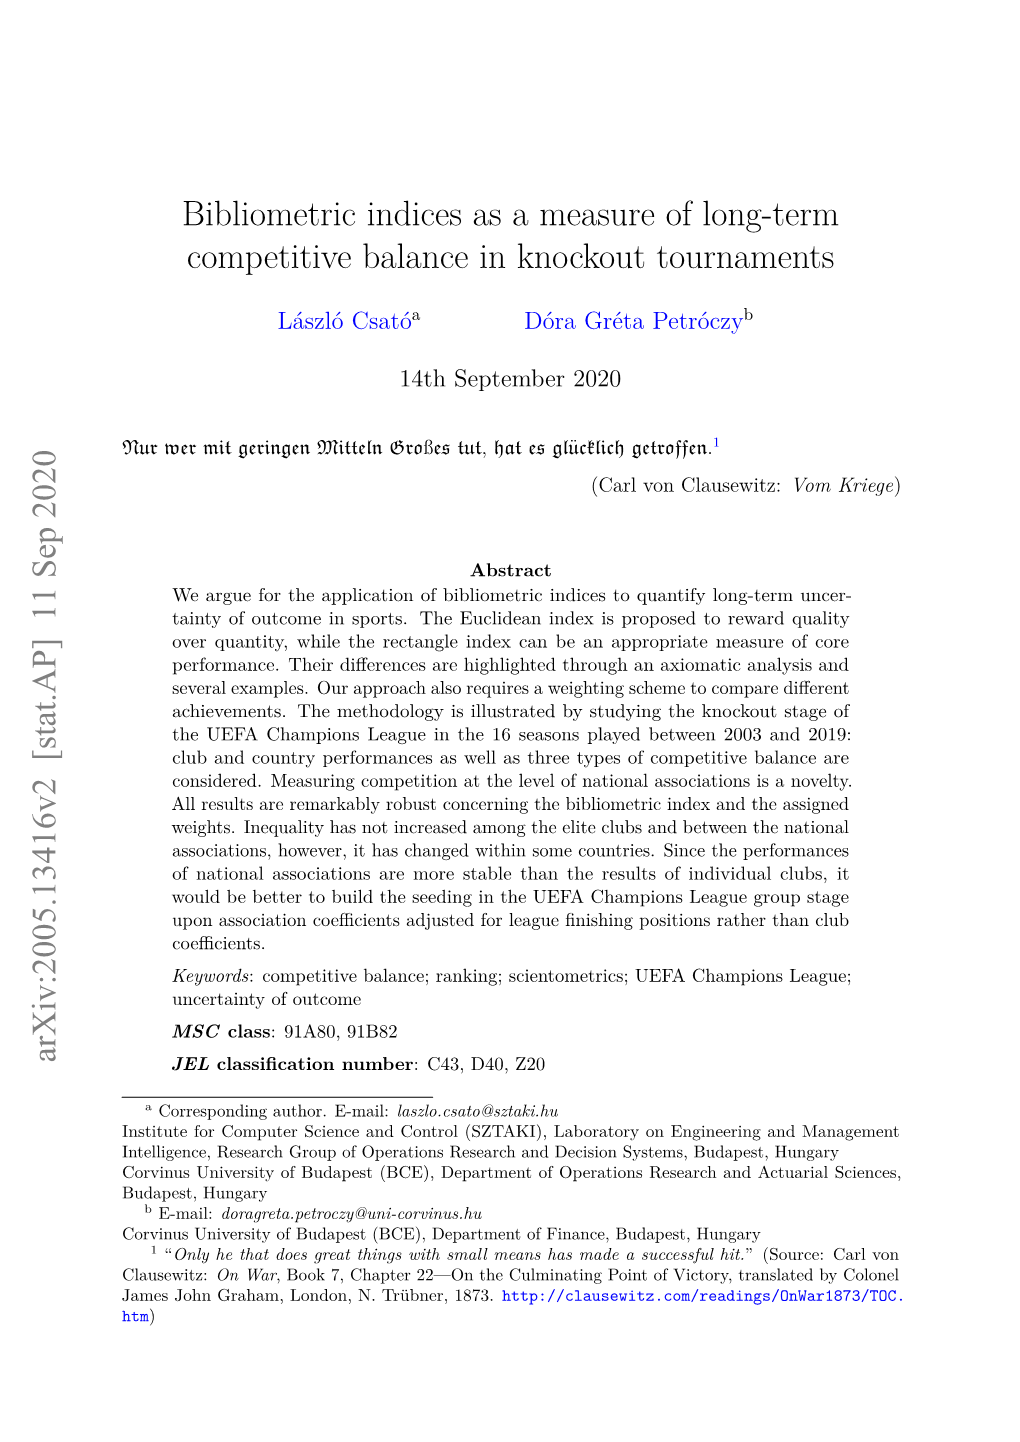 Bibliometric Indices As a Measure of Long-Term Competitive Balance in Knockout Tournaments Arxiv:2005.13416V2 [Stat.AP] 11